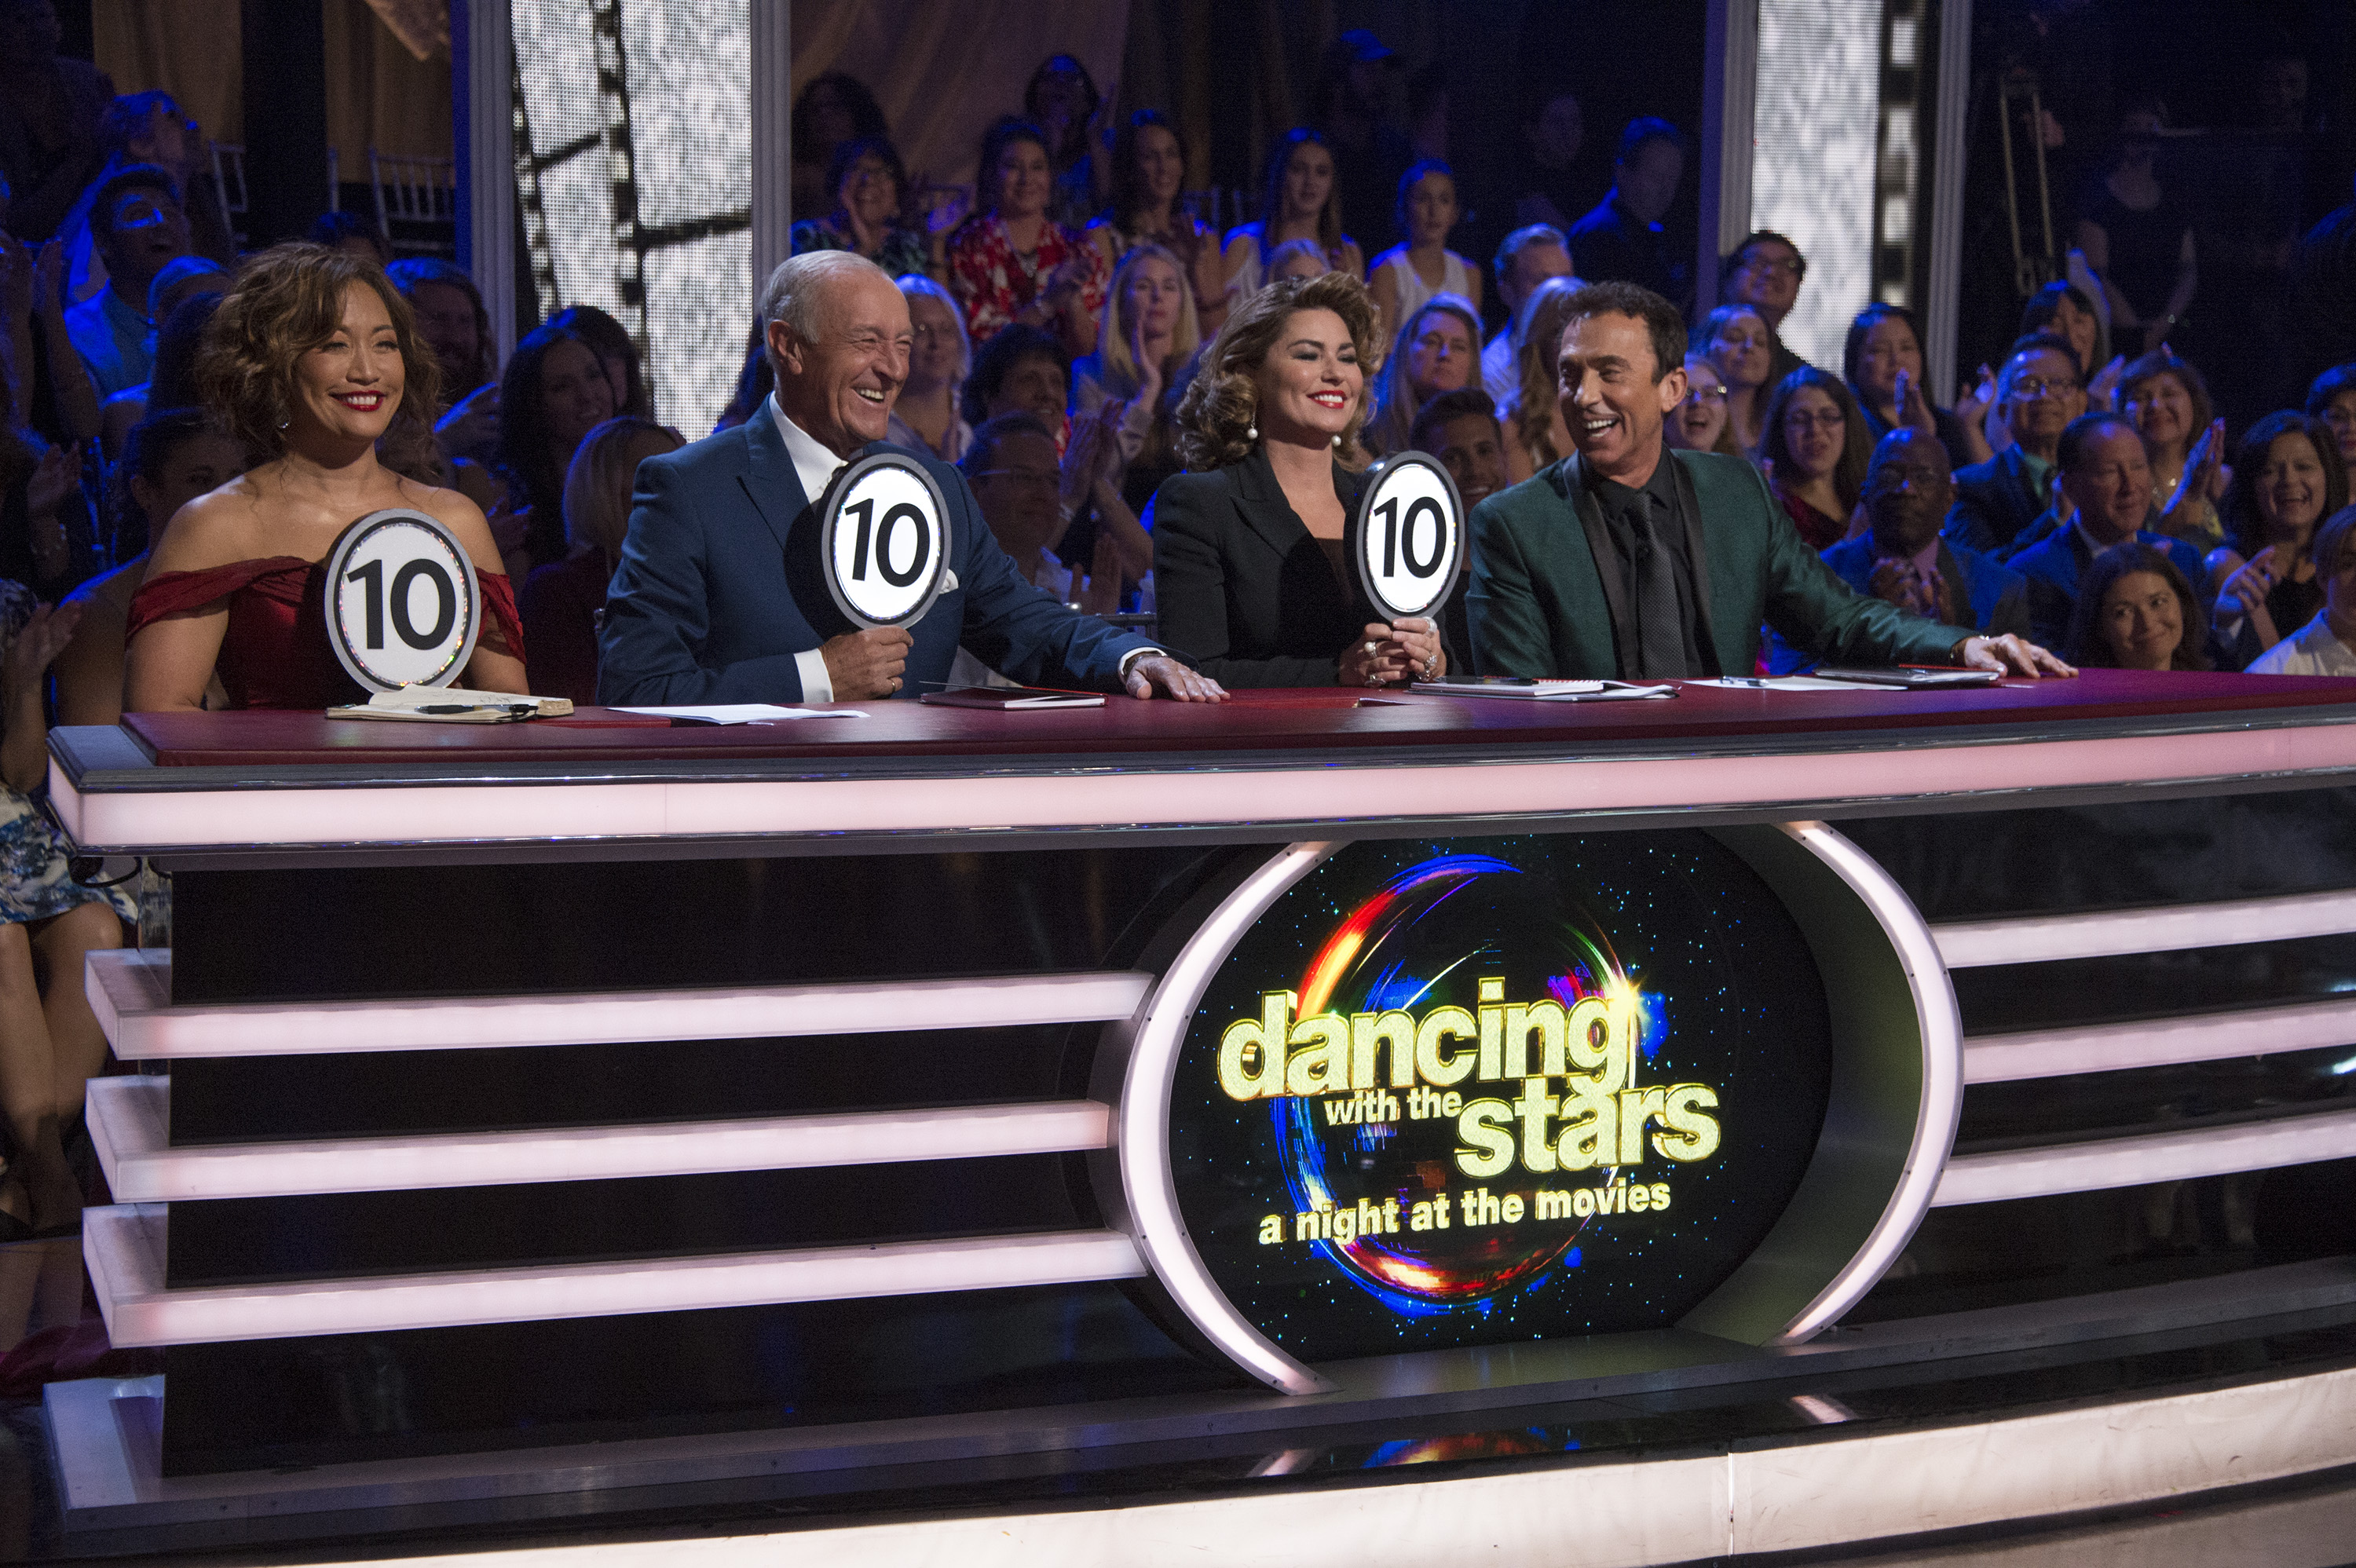 ‘A Night at the Movies’ on ‘Dancing with the Stars’: Recap and Elimination